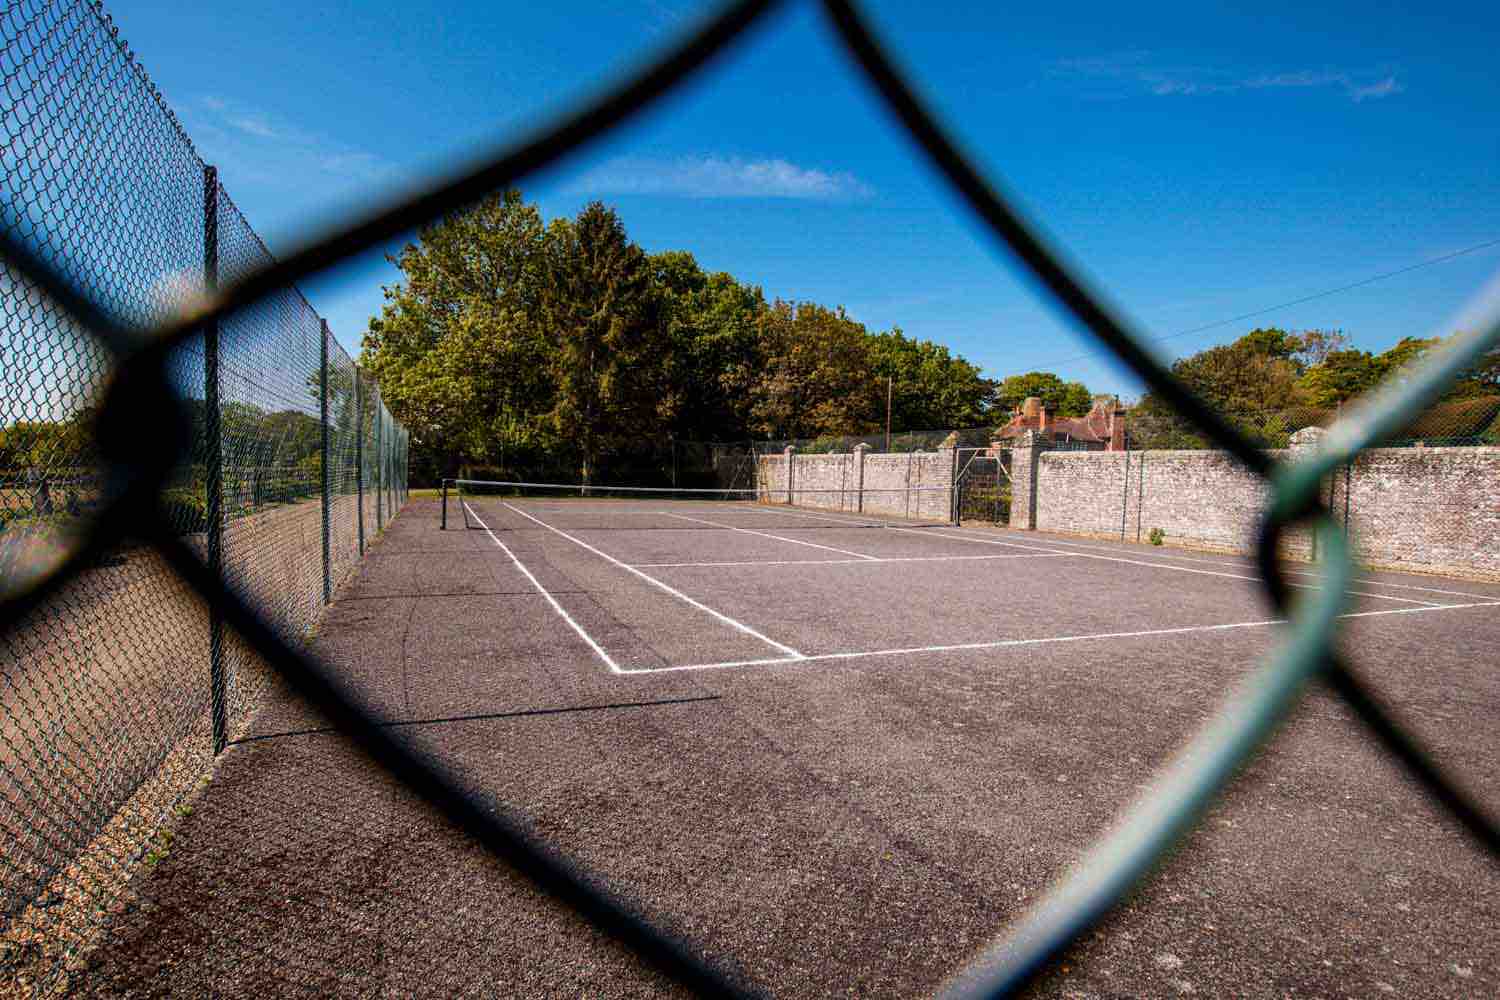 venues with tennis courts